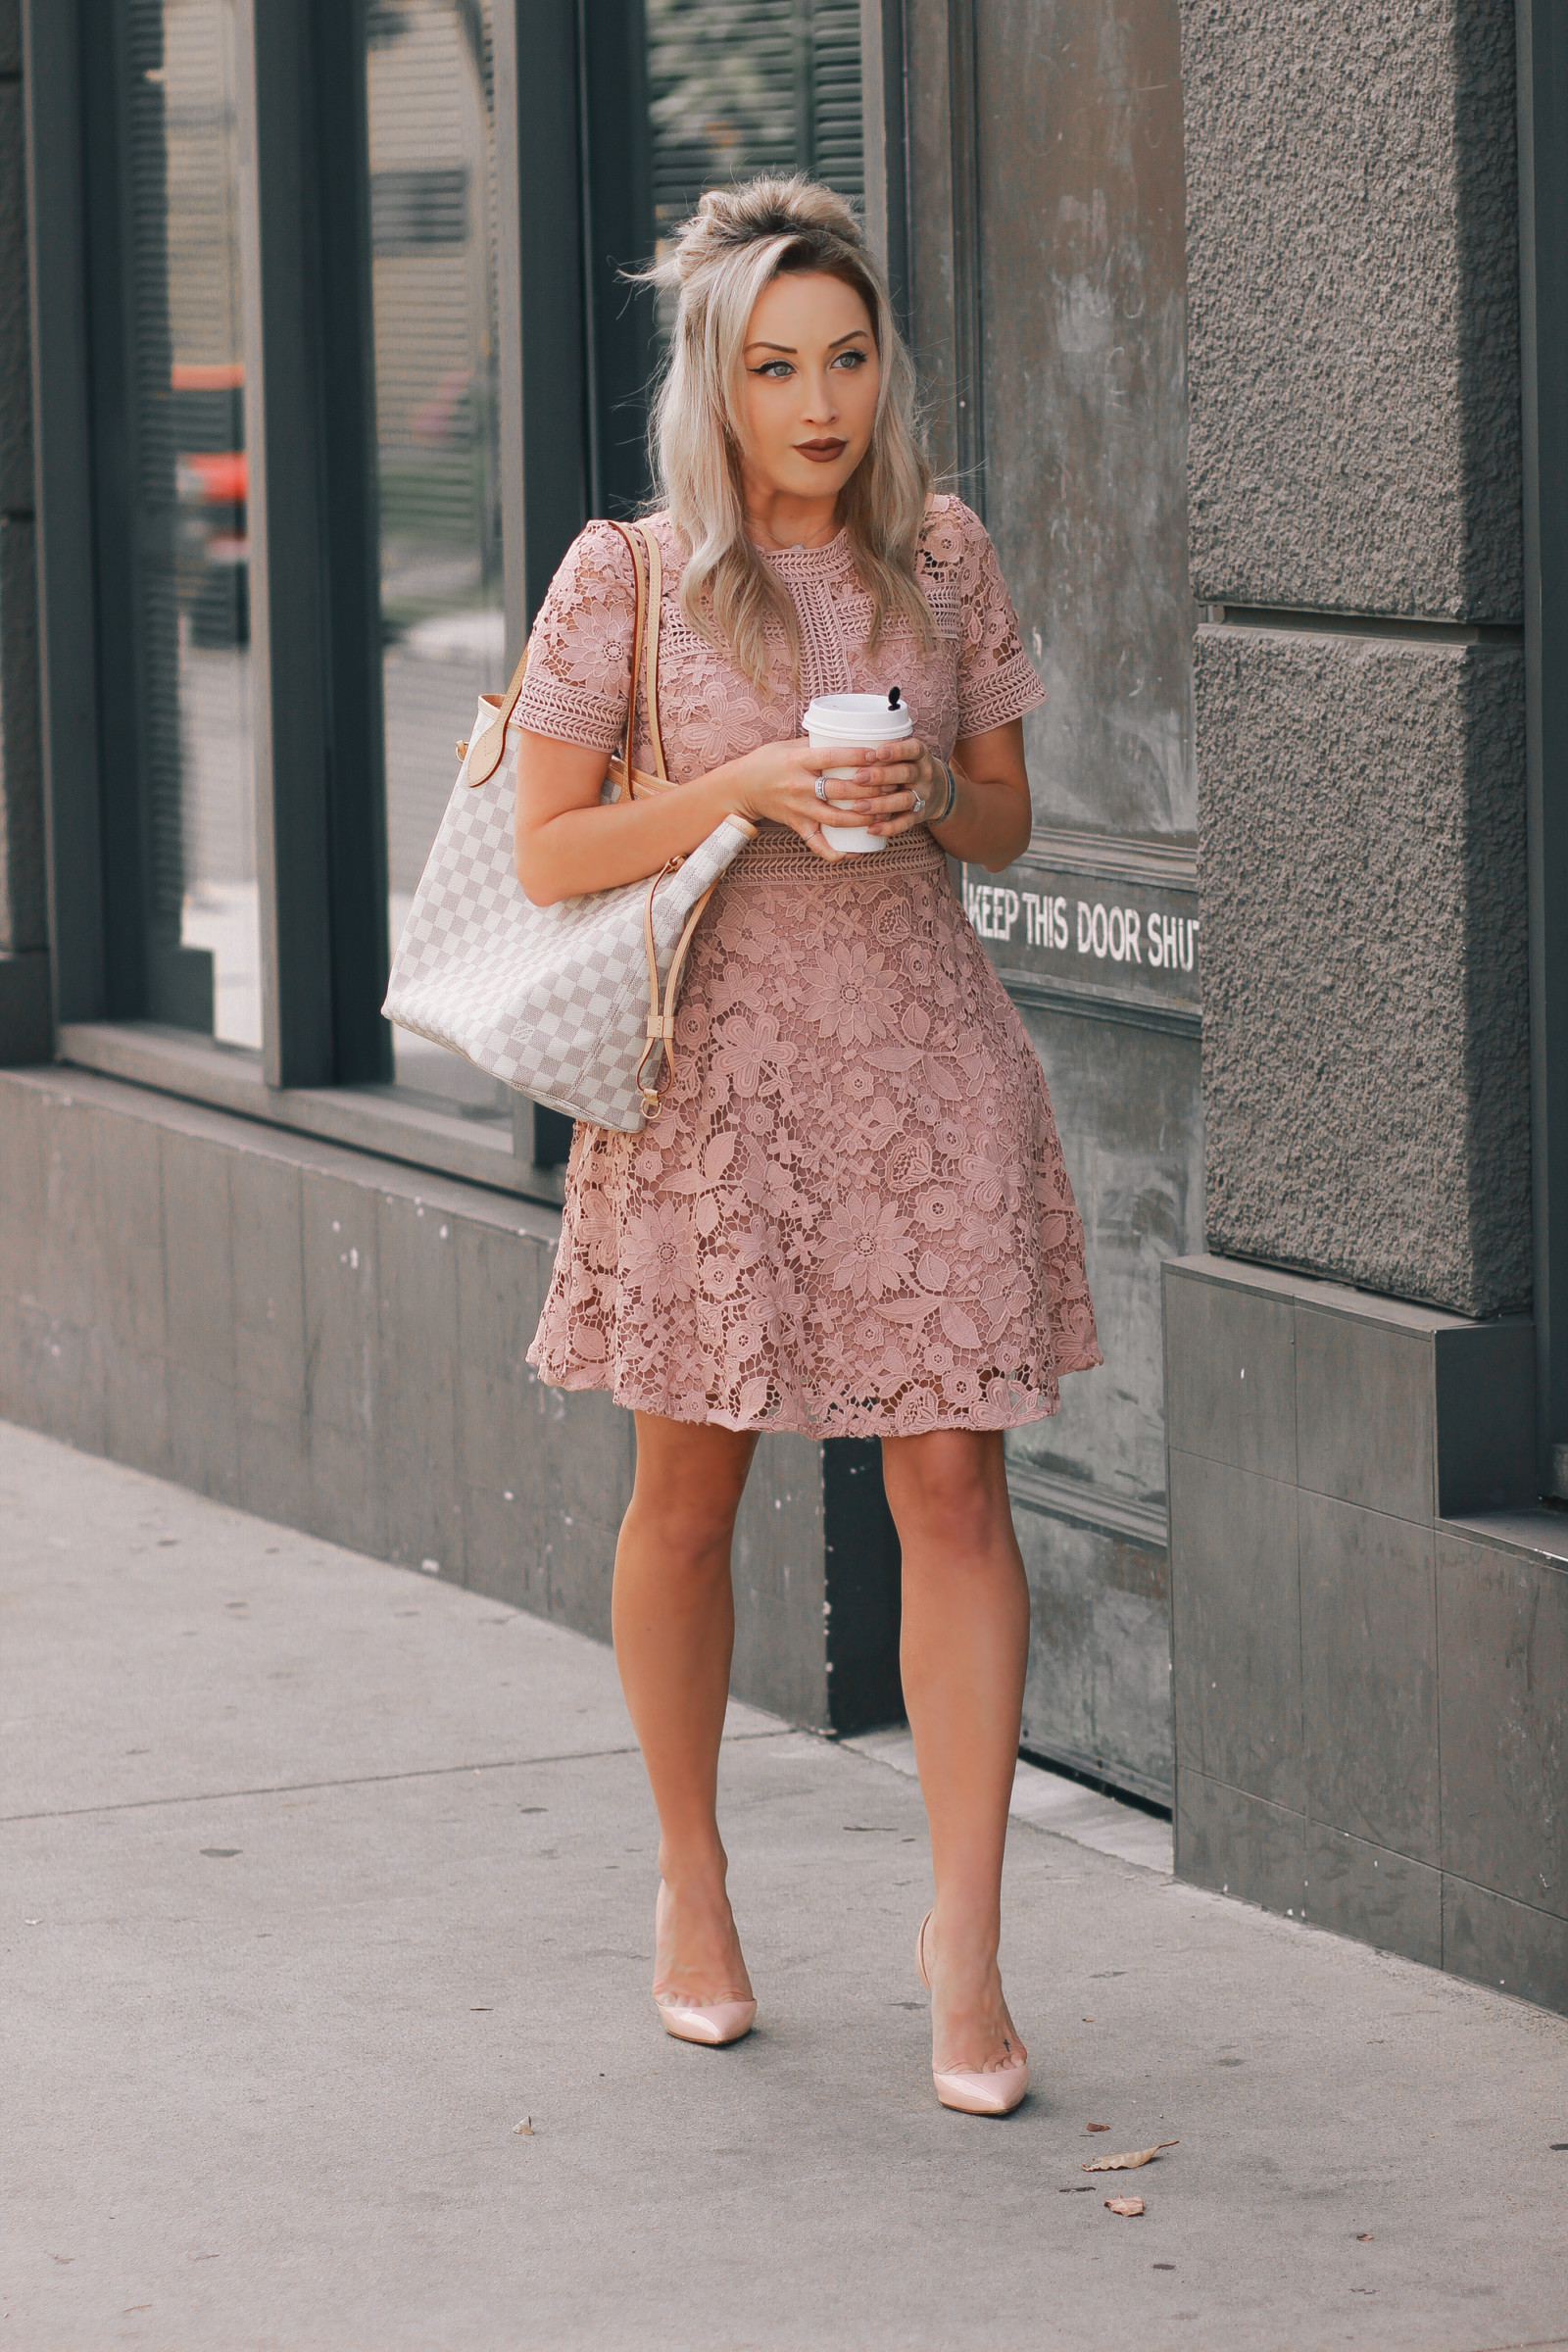 Blondie in the City | Pretty Pink Spring Dress | Louis Vuitton Neverfull | Pink Louboutin's